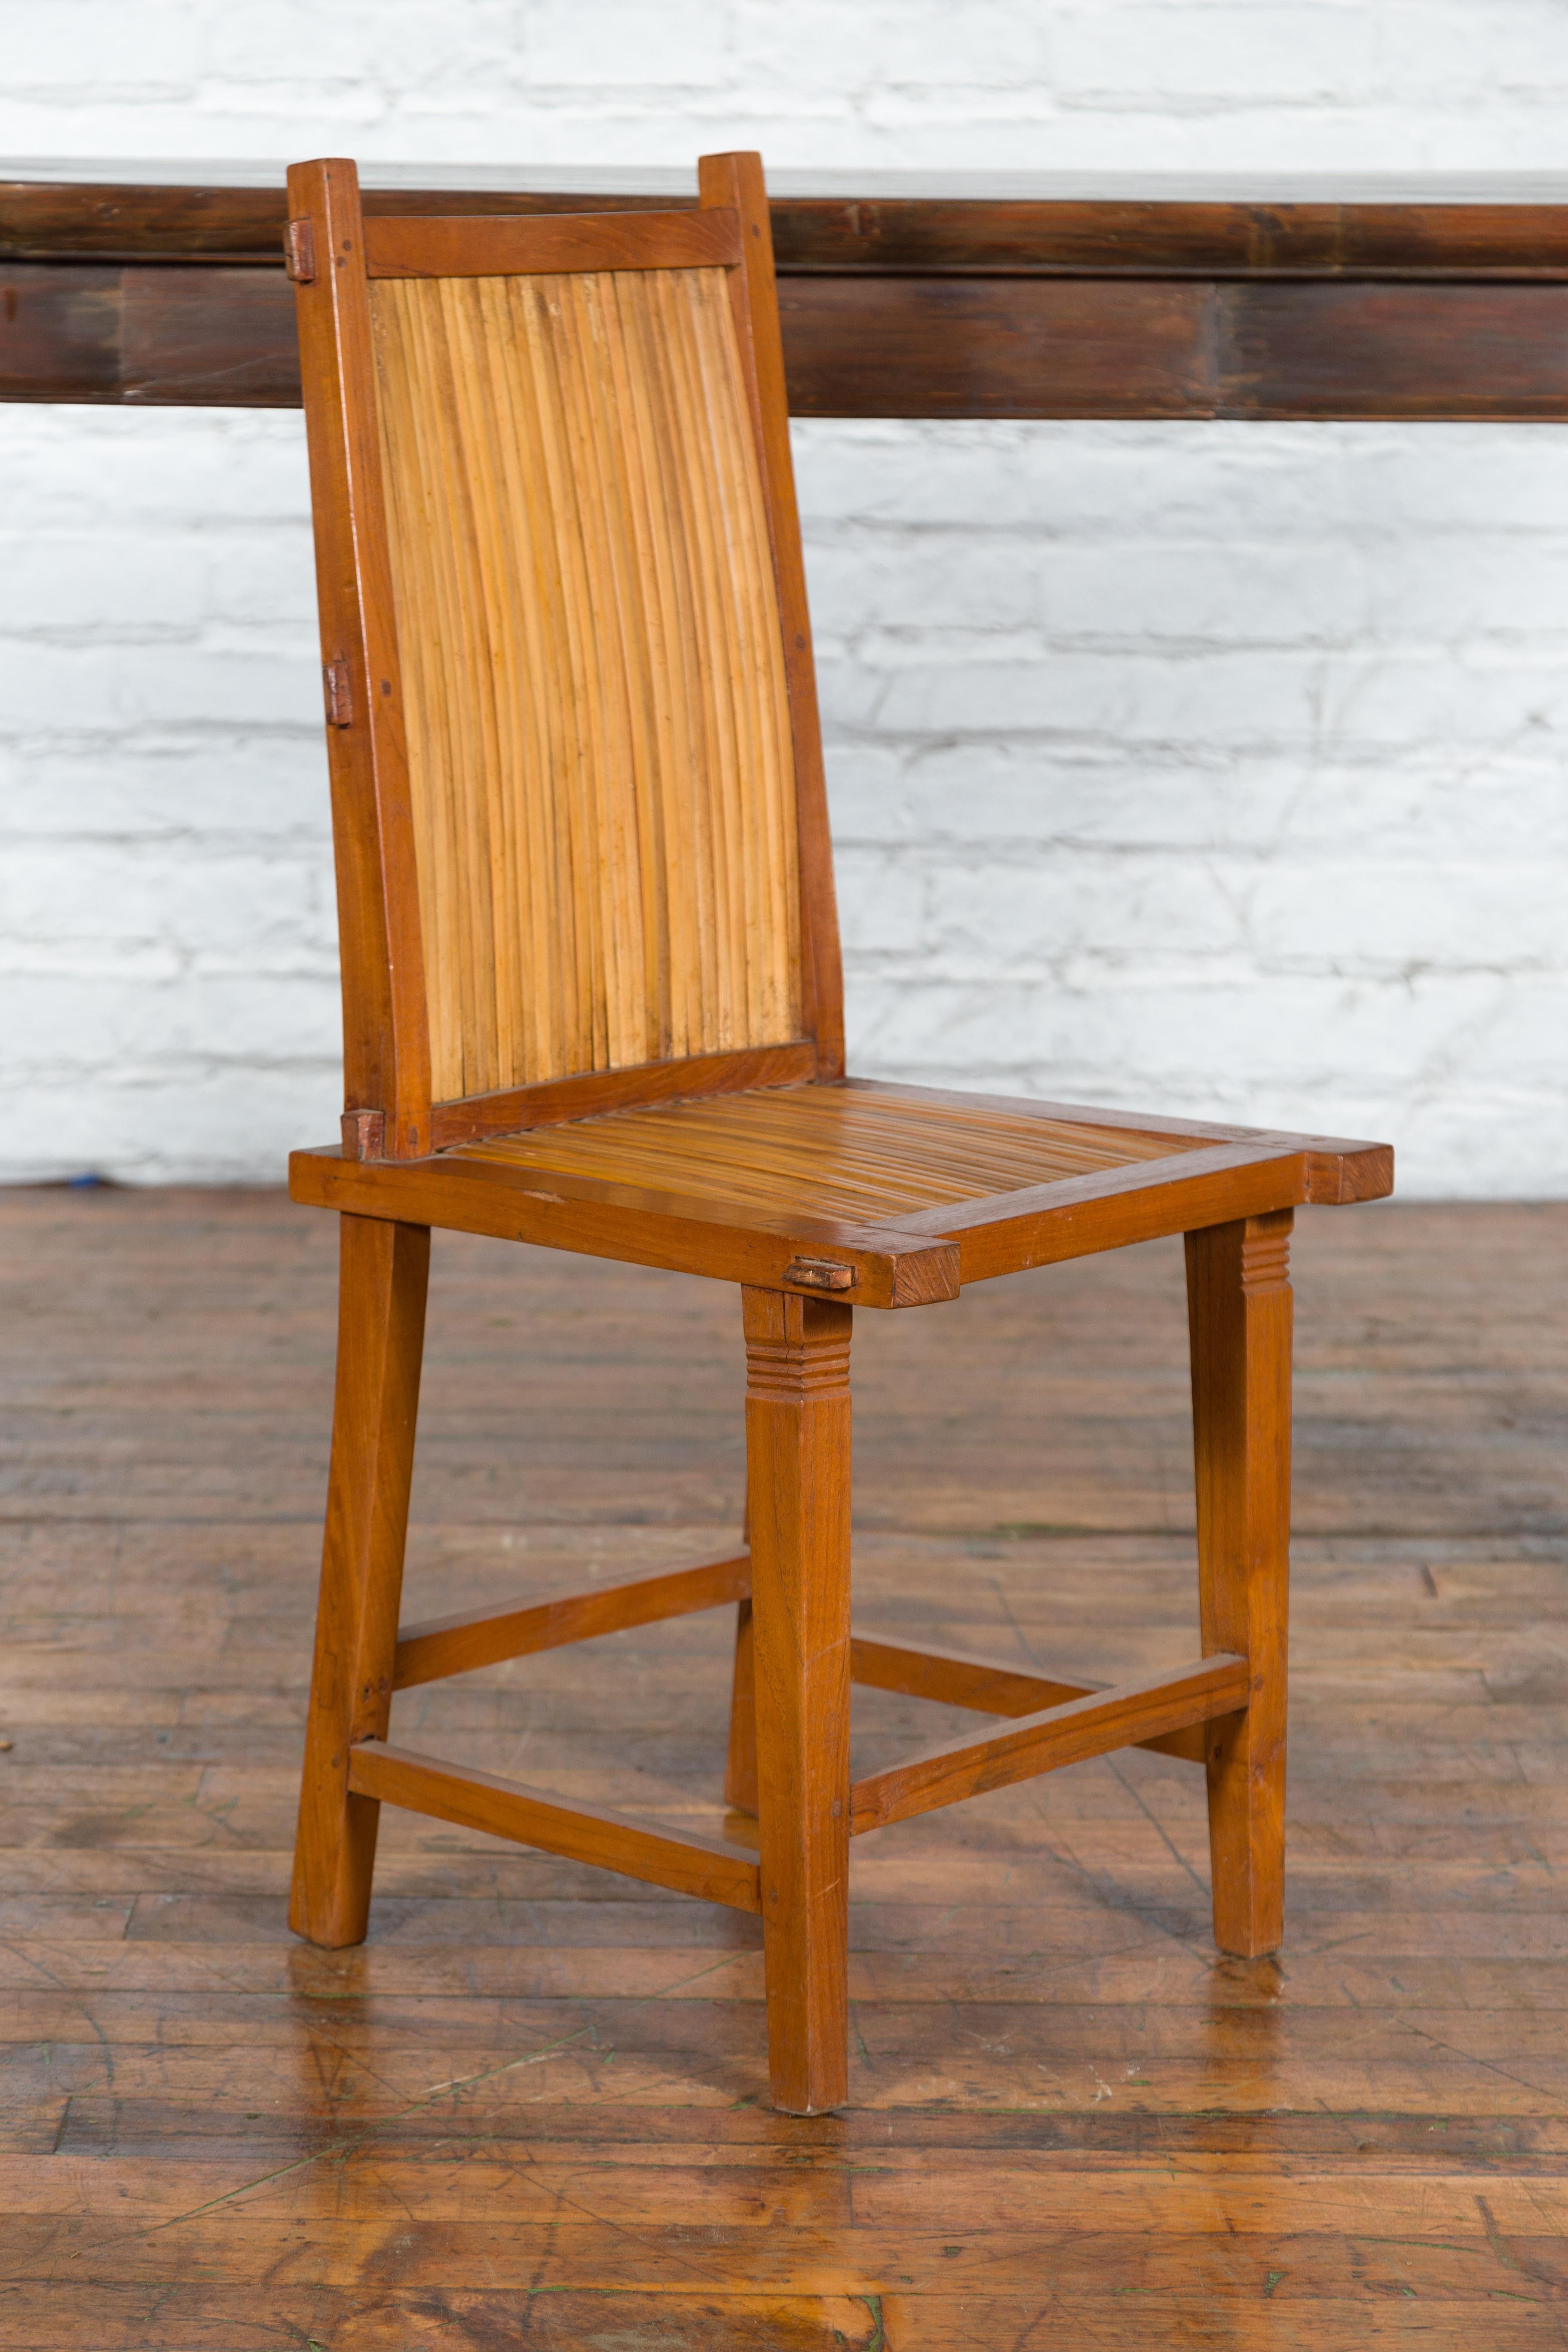 Rustic Javanese Vintage Wooden Side Chair with Slatted Bamboo Back and Seat For Sale 8